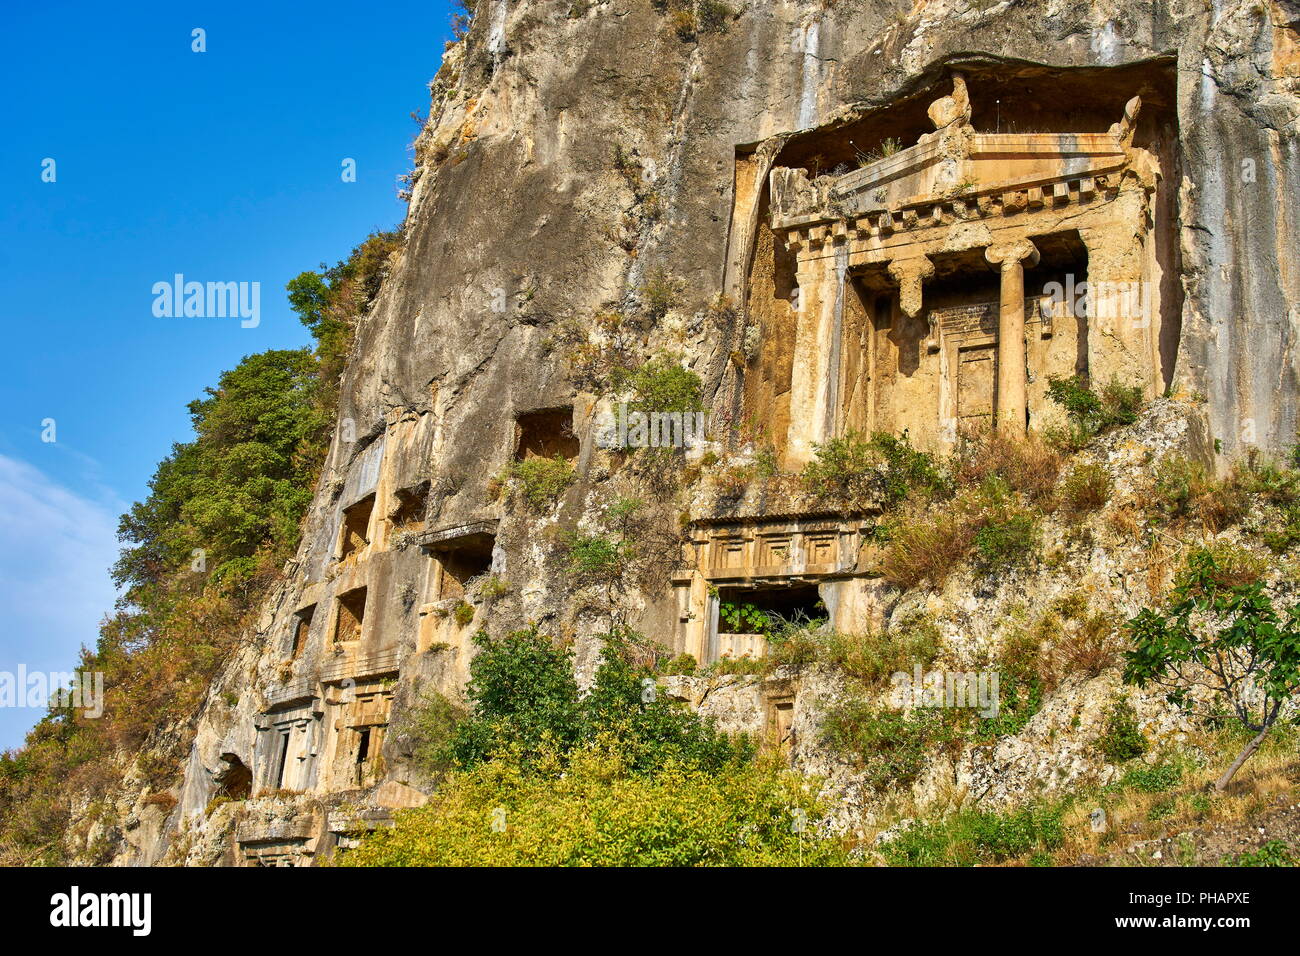 Tomb of Amyntas  carved in the rock, Fethiye, Turkey Stock Photo